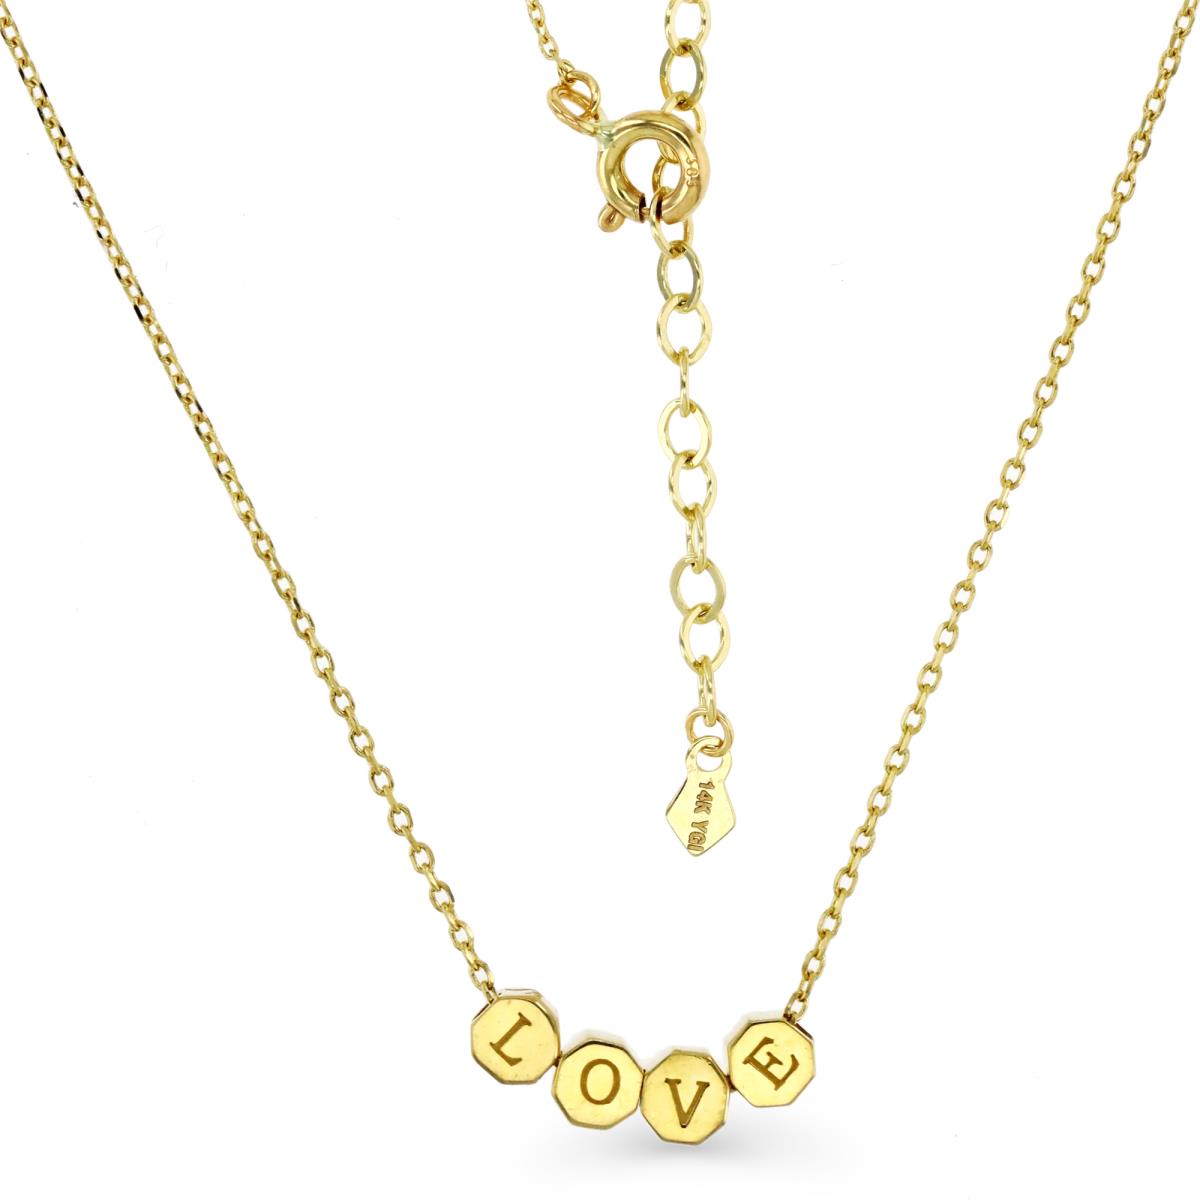 14K Gold Yellow "LOVE" Slide Charms 16+2" Necklace